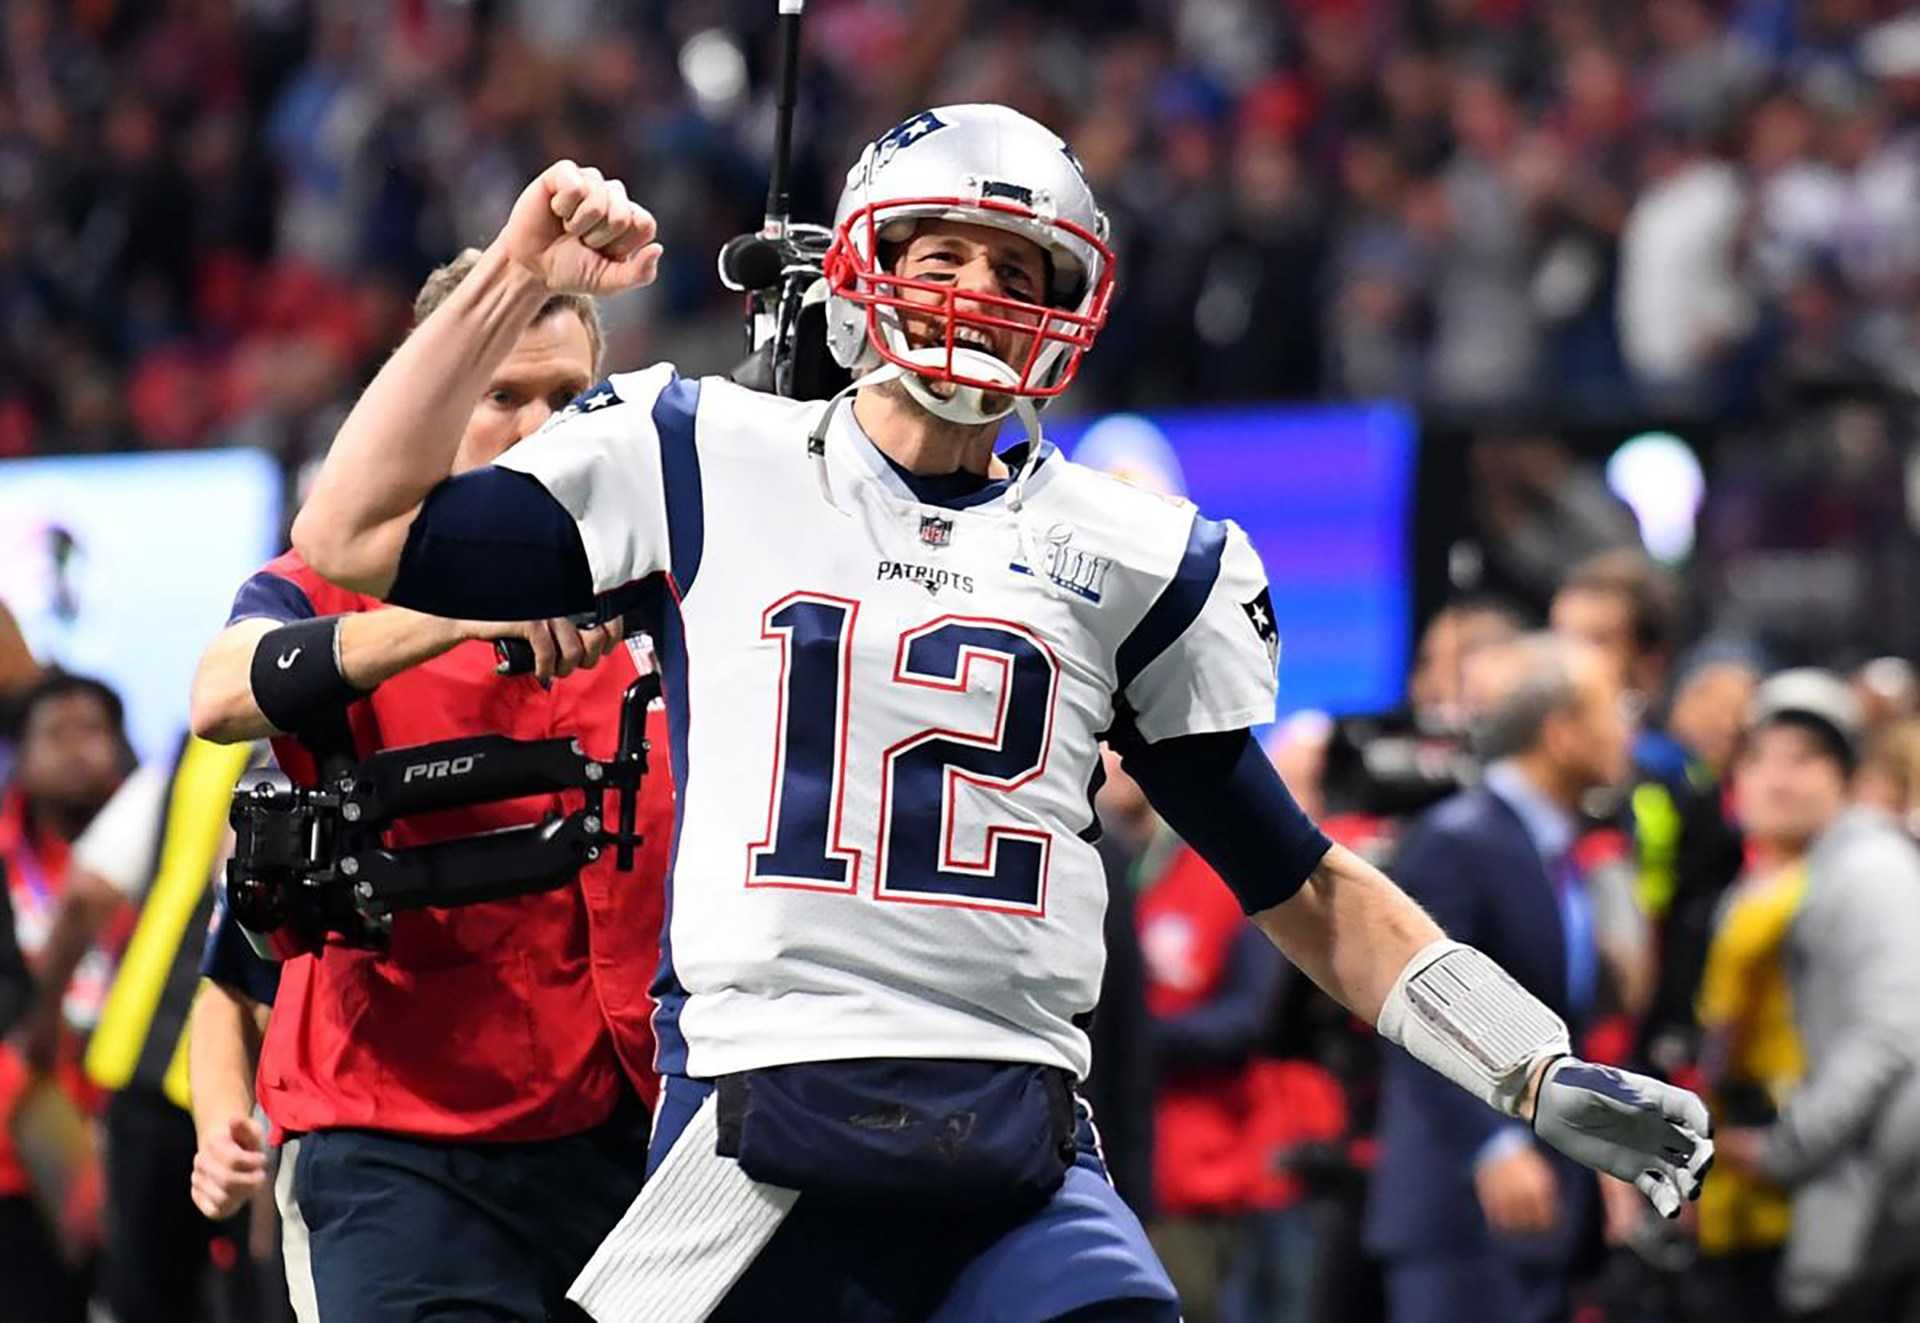 What Can Marketers Learn From The New England Patriots